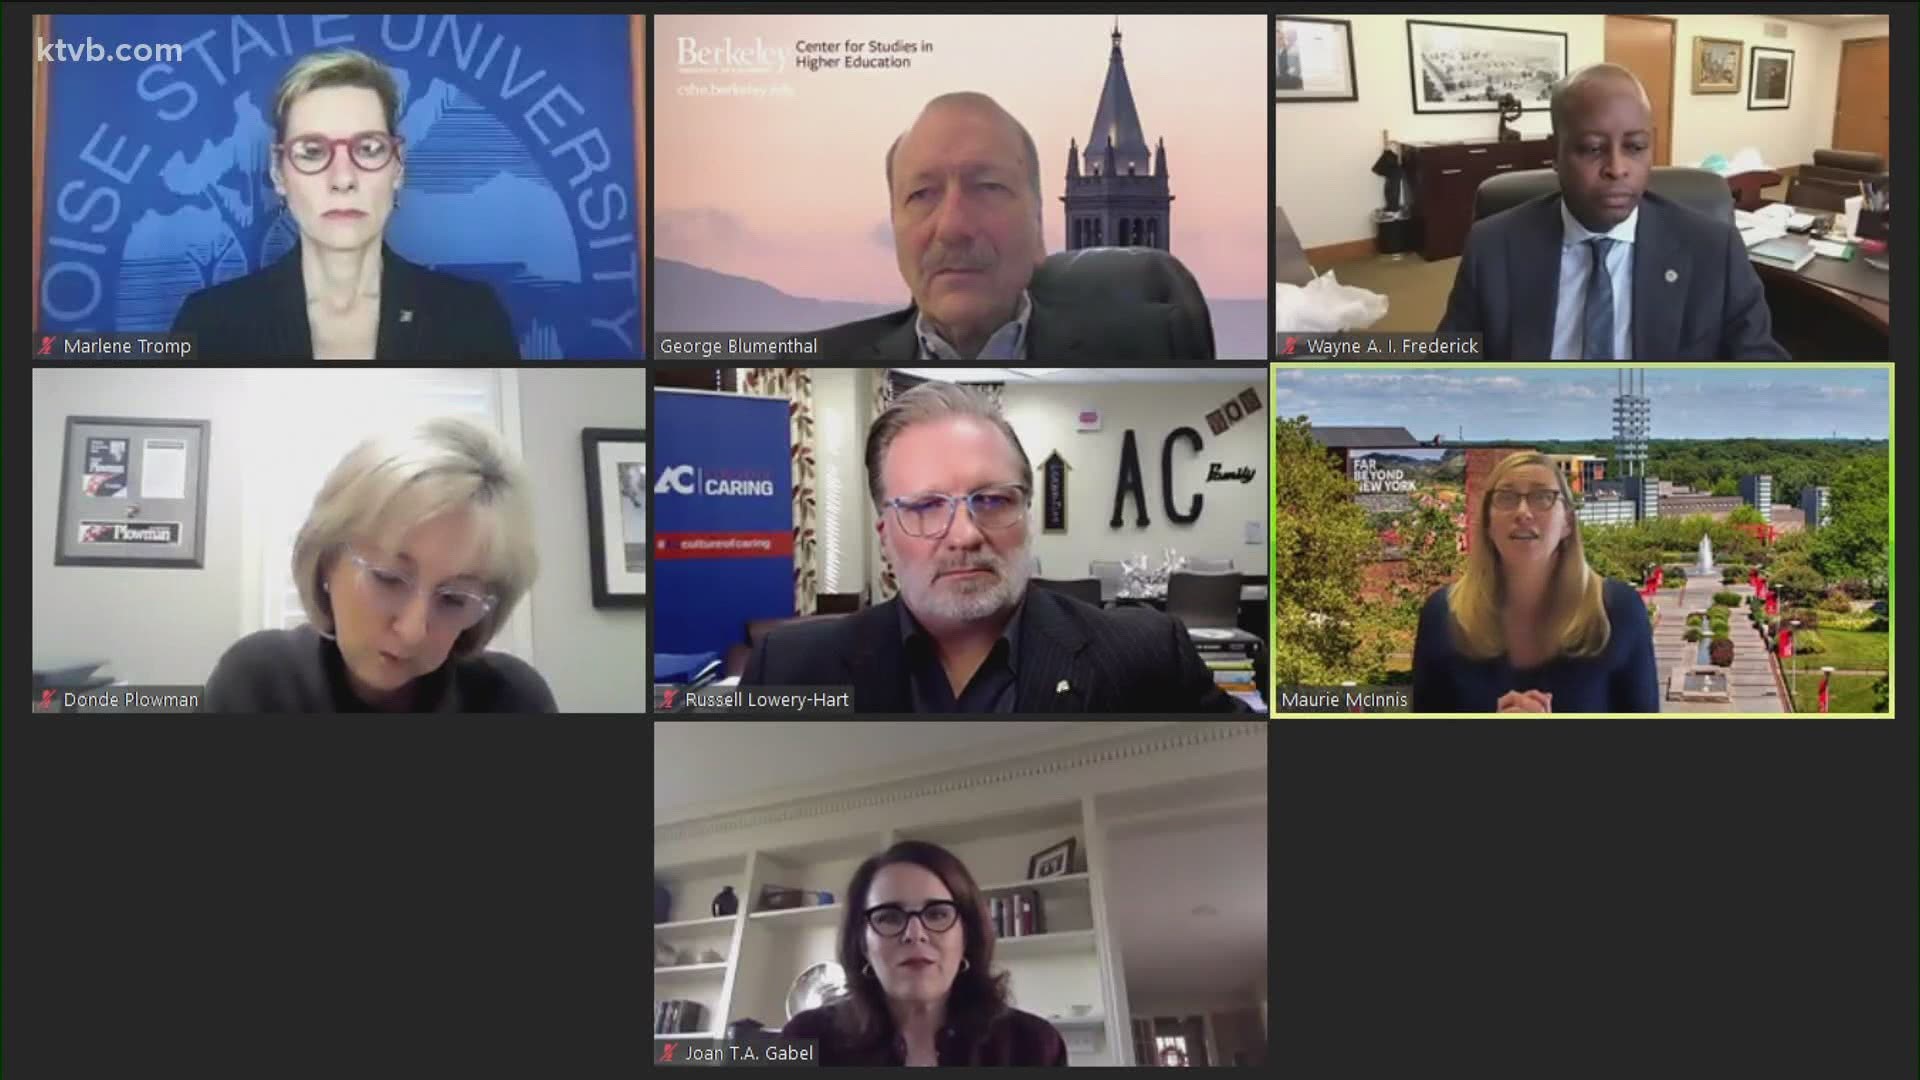 Dr. Marlene Tromp hosted a national virtual roundtable to discuss some of the challenges universities have faced amid the coronavirus pandemic.